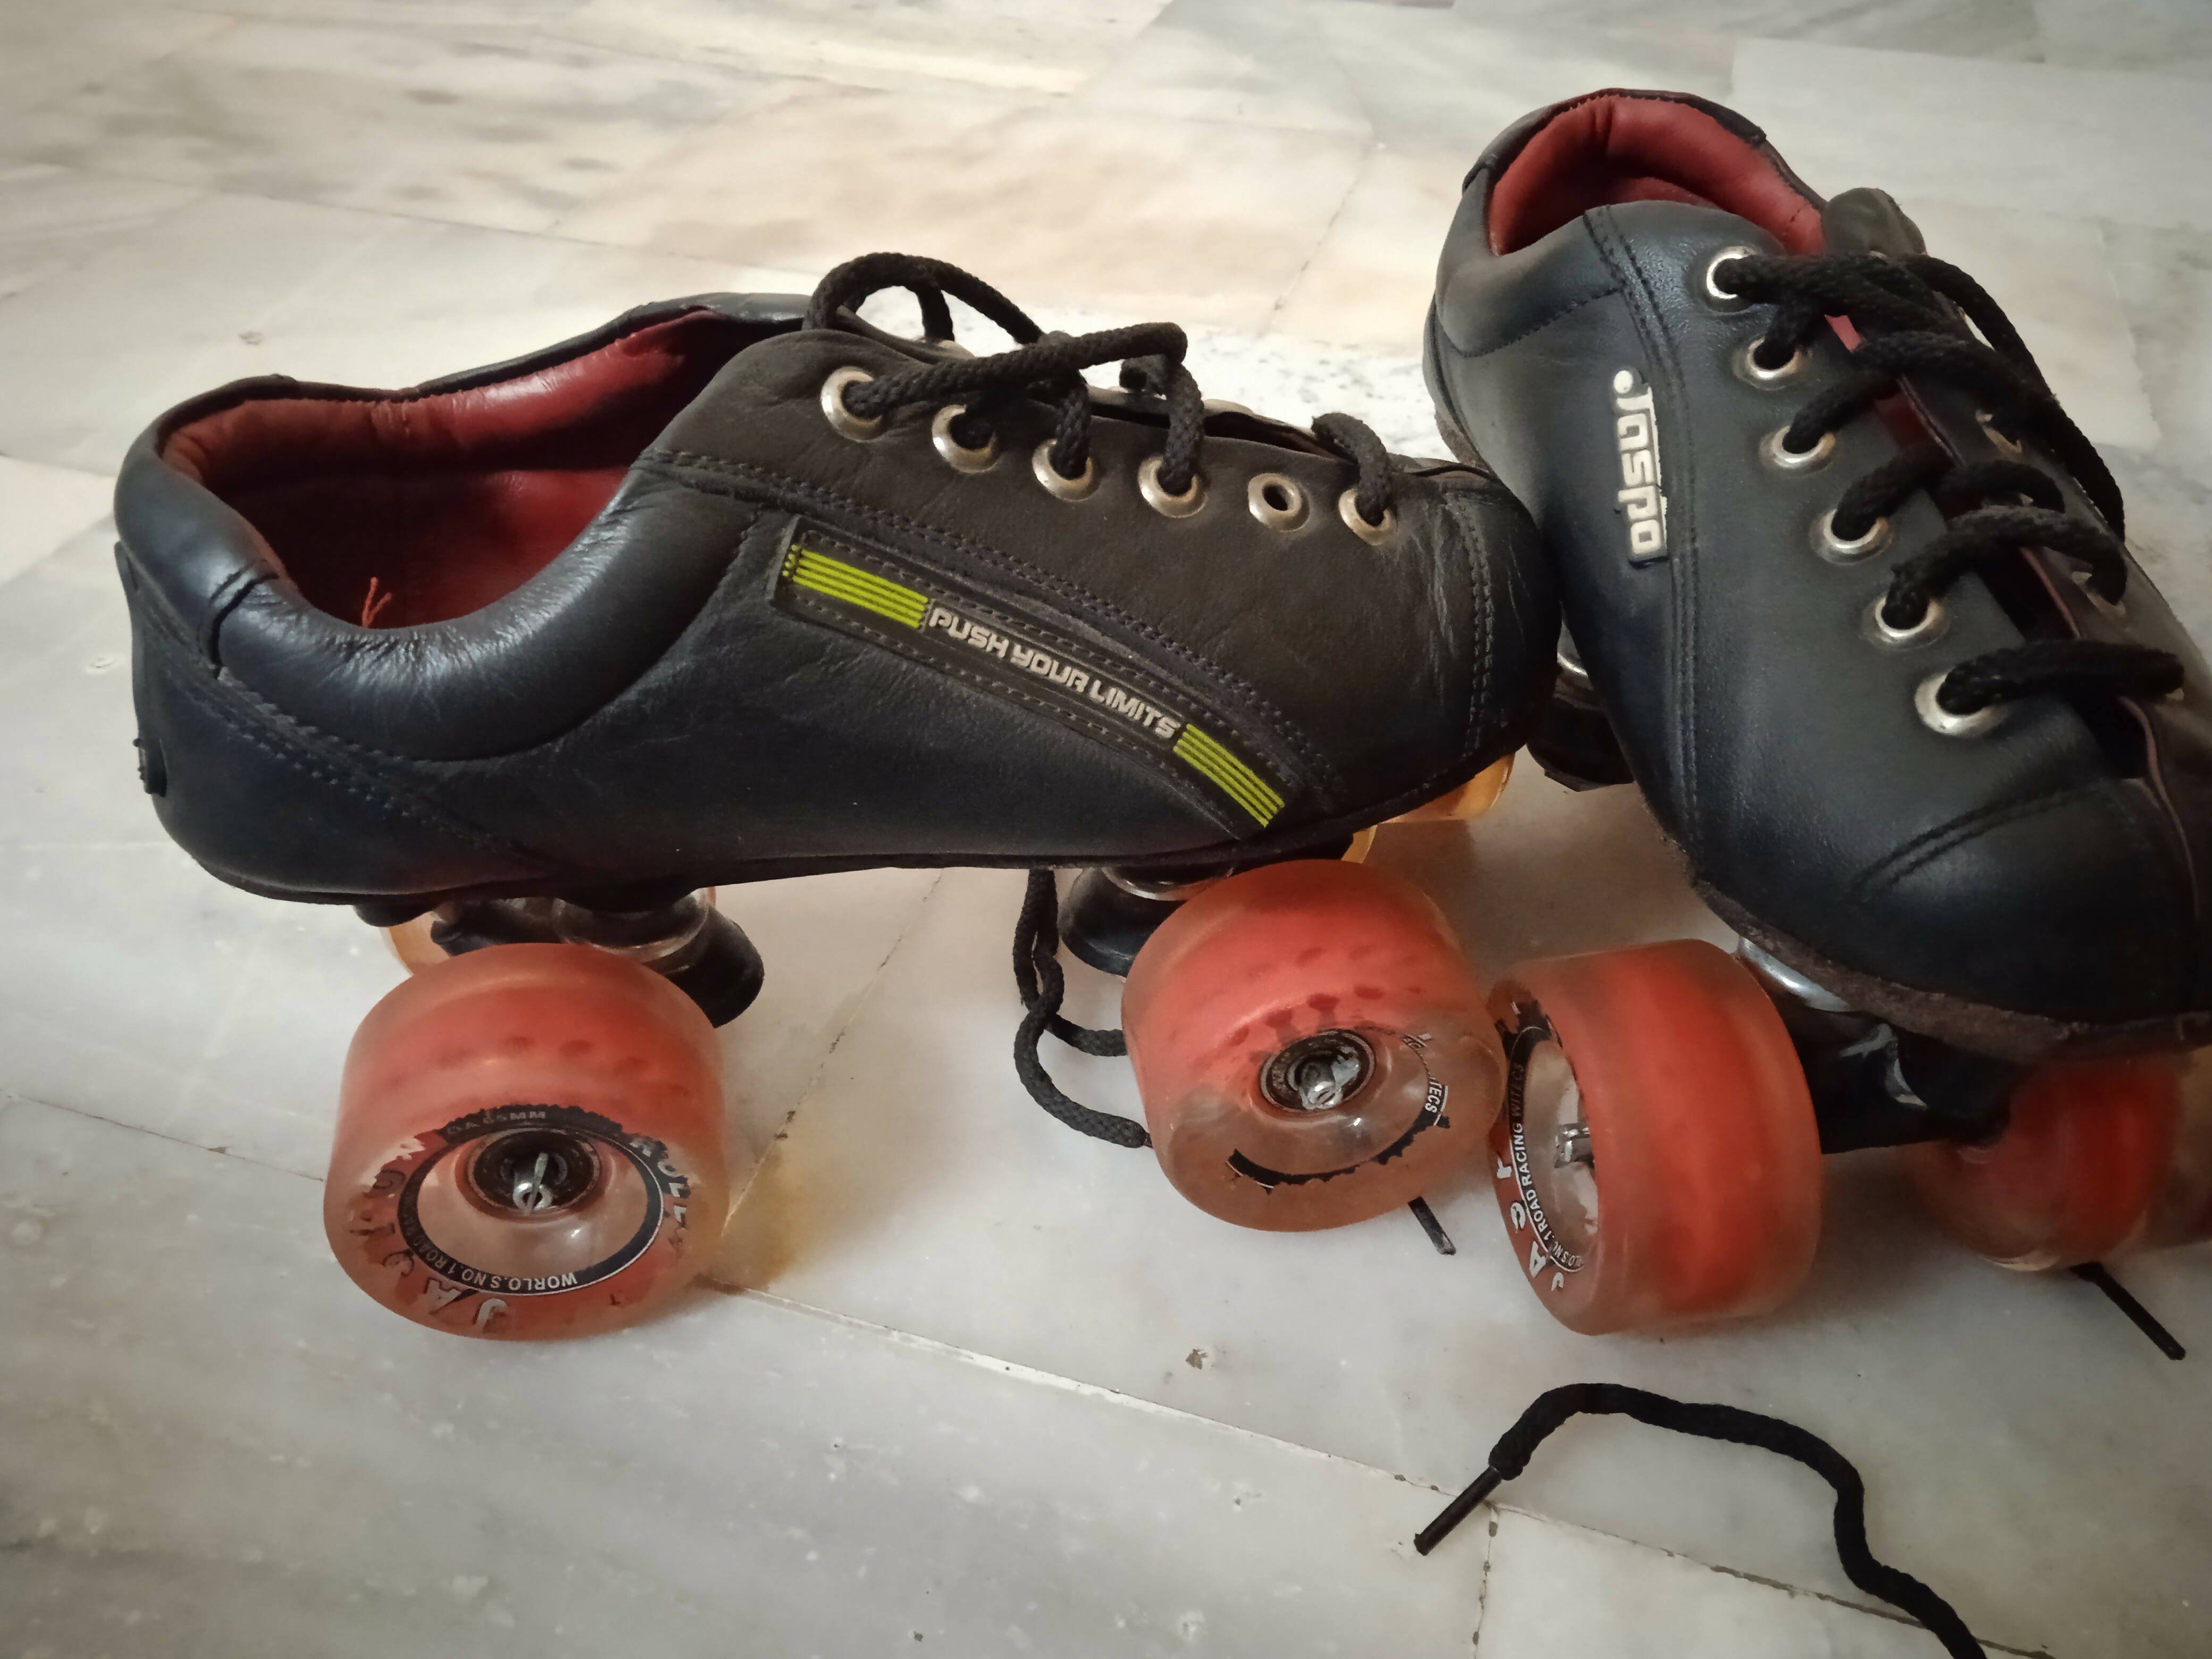 jaspo pro Hyper Furious high Speed Quad Shoe Skates for Professional and Intermediate Users- 8 years